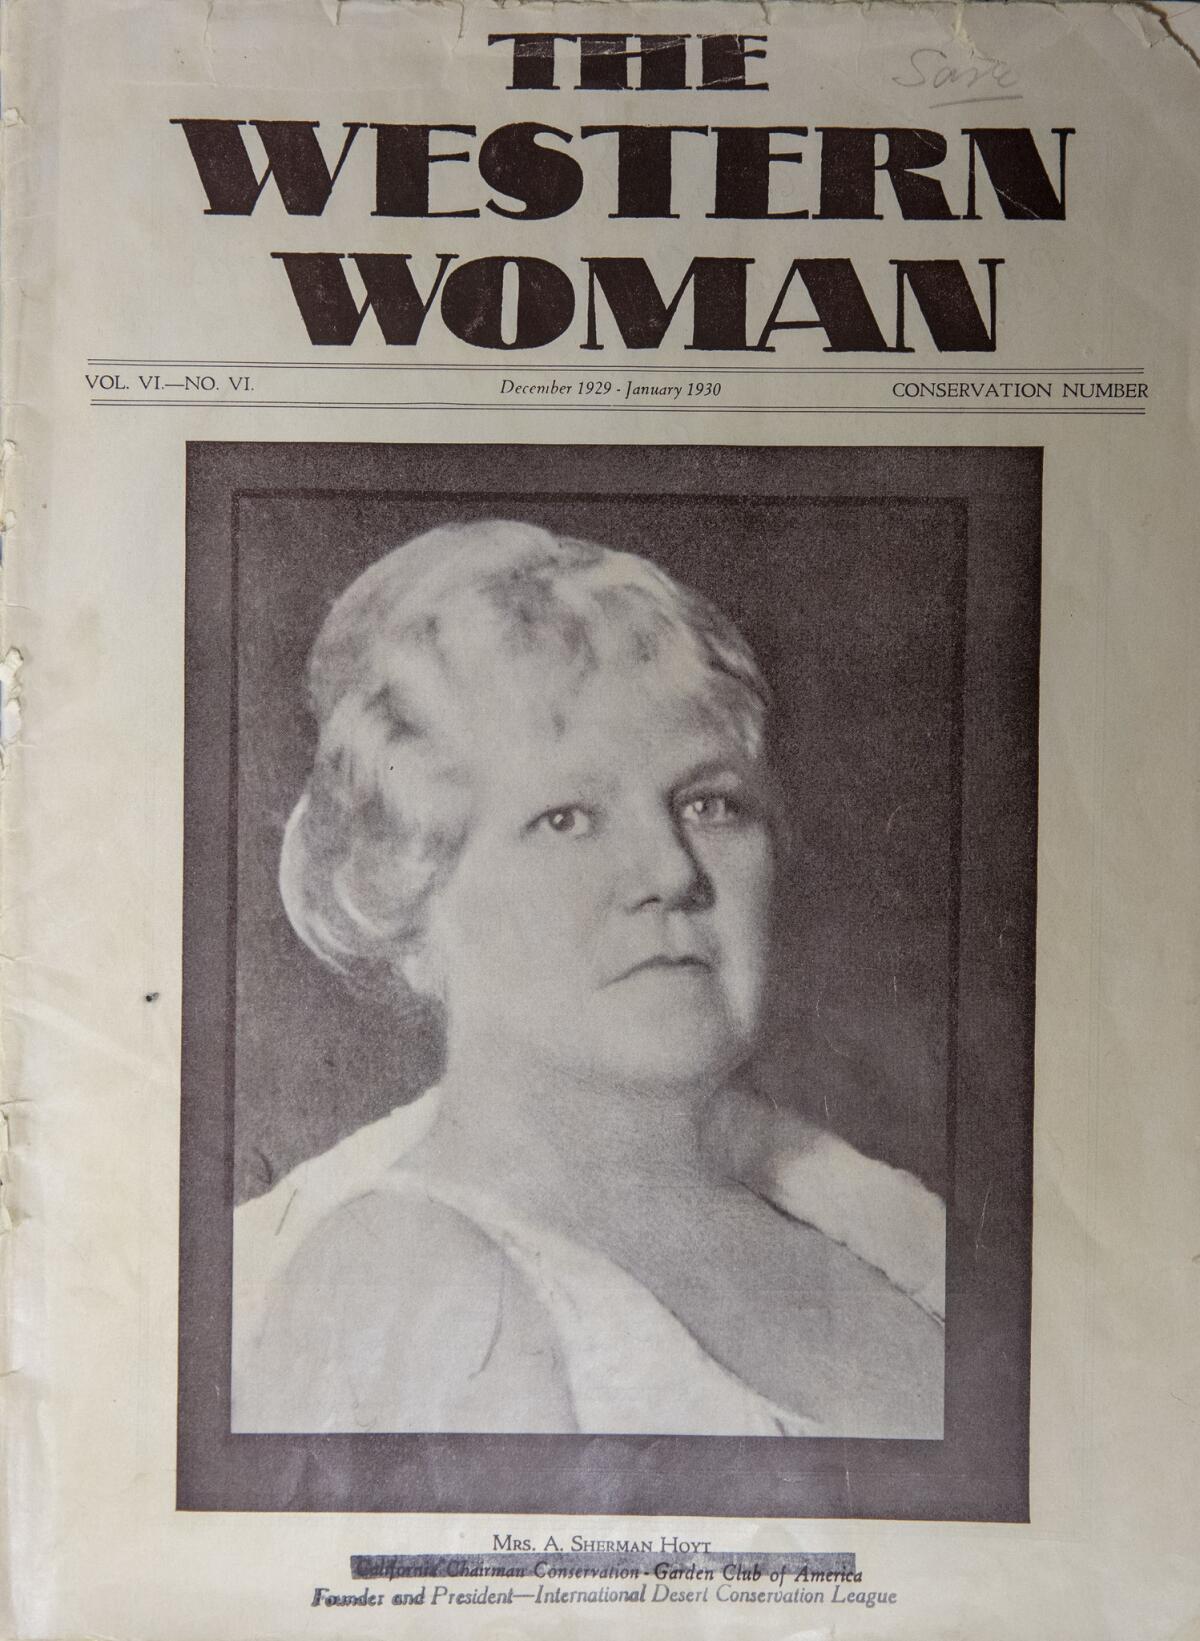 JOSHUA TREE NATIONAL PARK, CALIF. -- MONDAY, NOVEMBER 19, 2018: Copy photo of Minerva Hamilton Hoyt, on the cover of the December 1929-January 1930 edition of Western Woman magazine, from the park archive in Joshua Tree National Park, Calif., on Nov. 19, 2018. ( / Photo courtesy National Park Service)